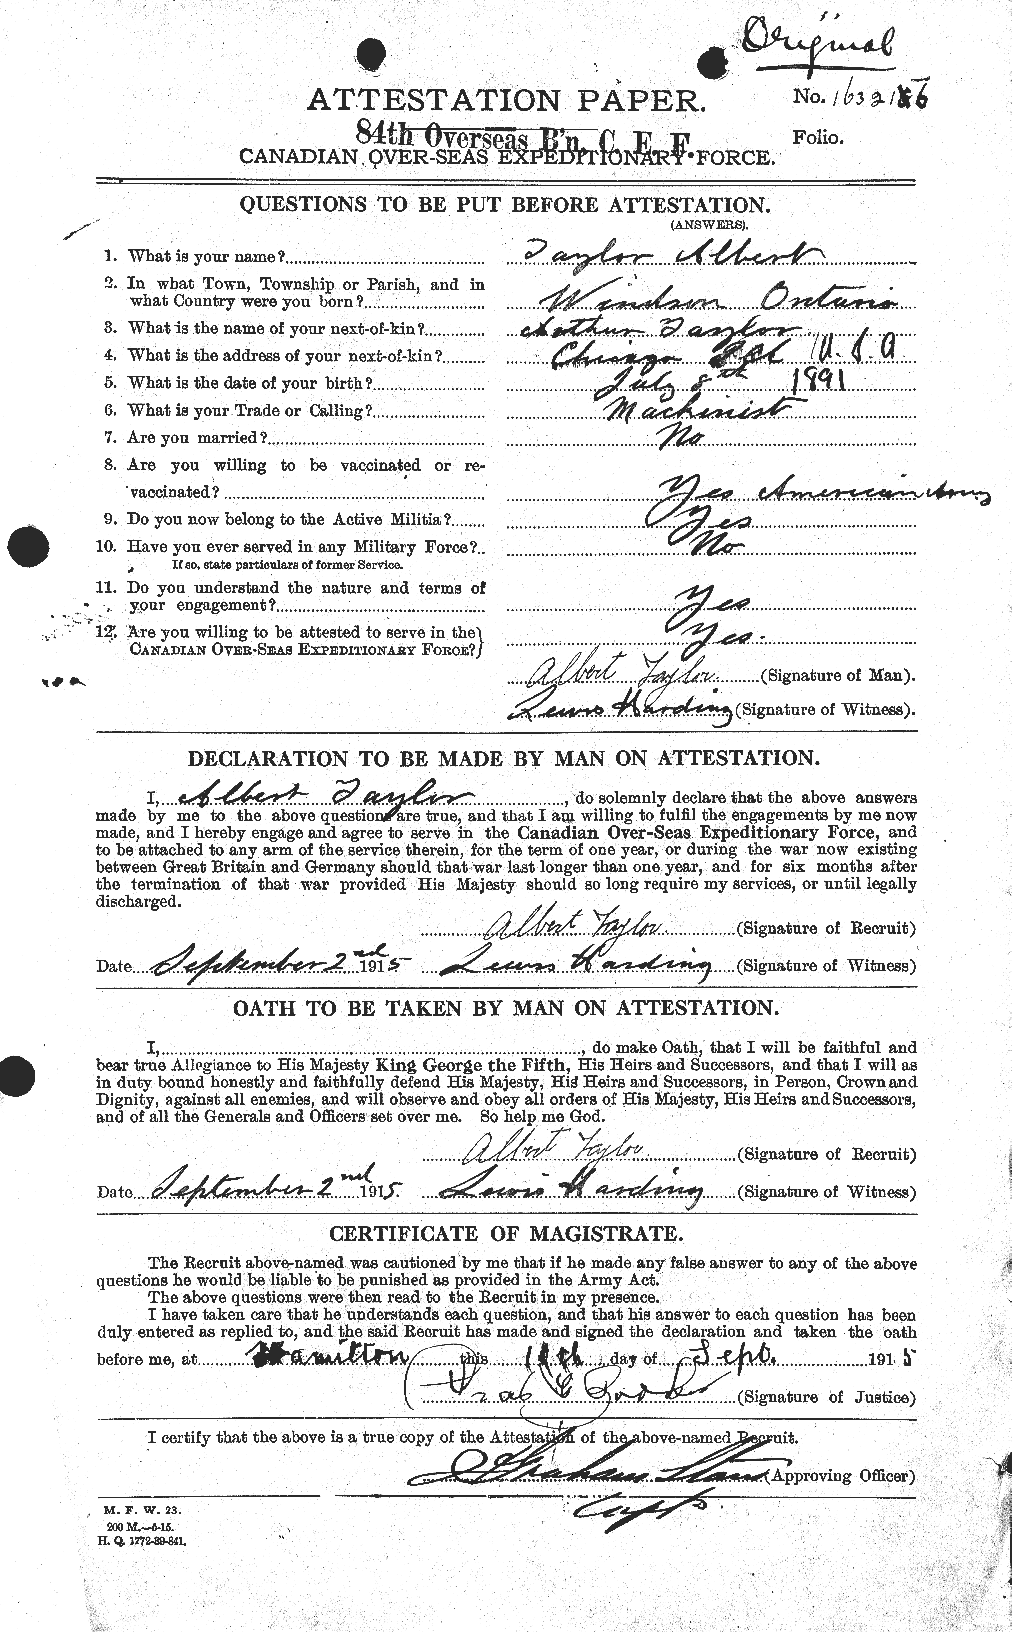 Personnel Records of the First World War - CEF 626089a